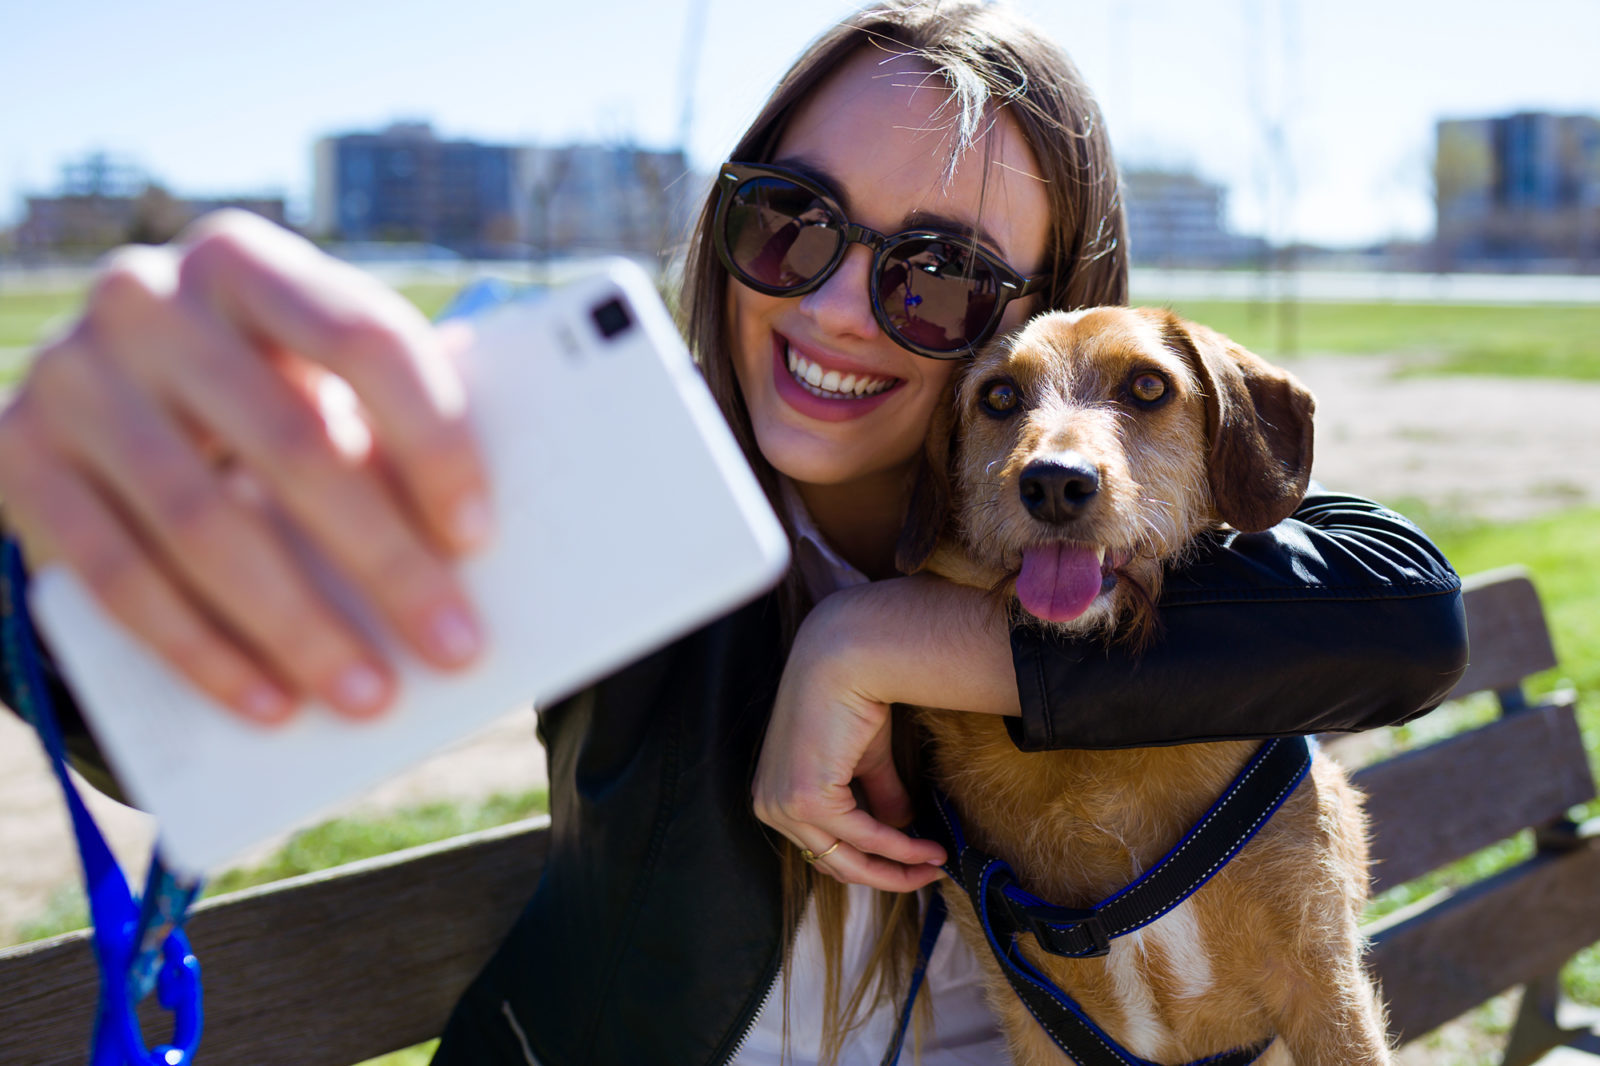 Young woman taking a selfie on her mobile phone with dog